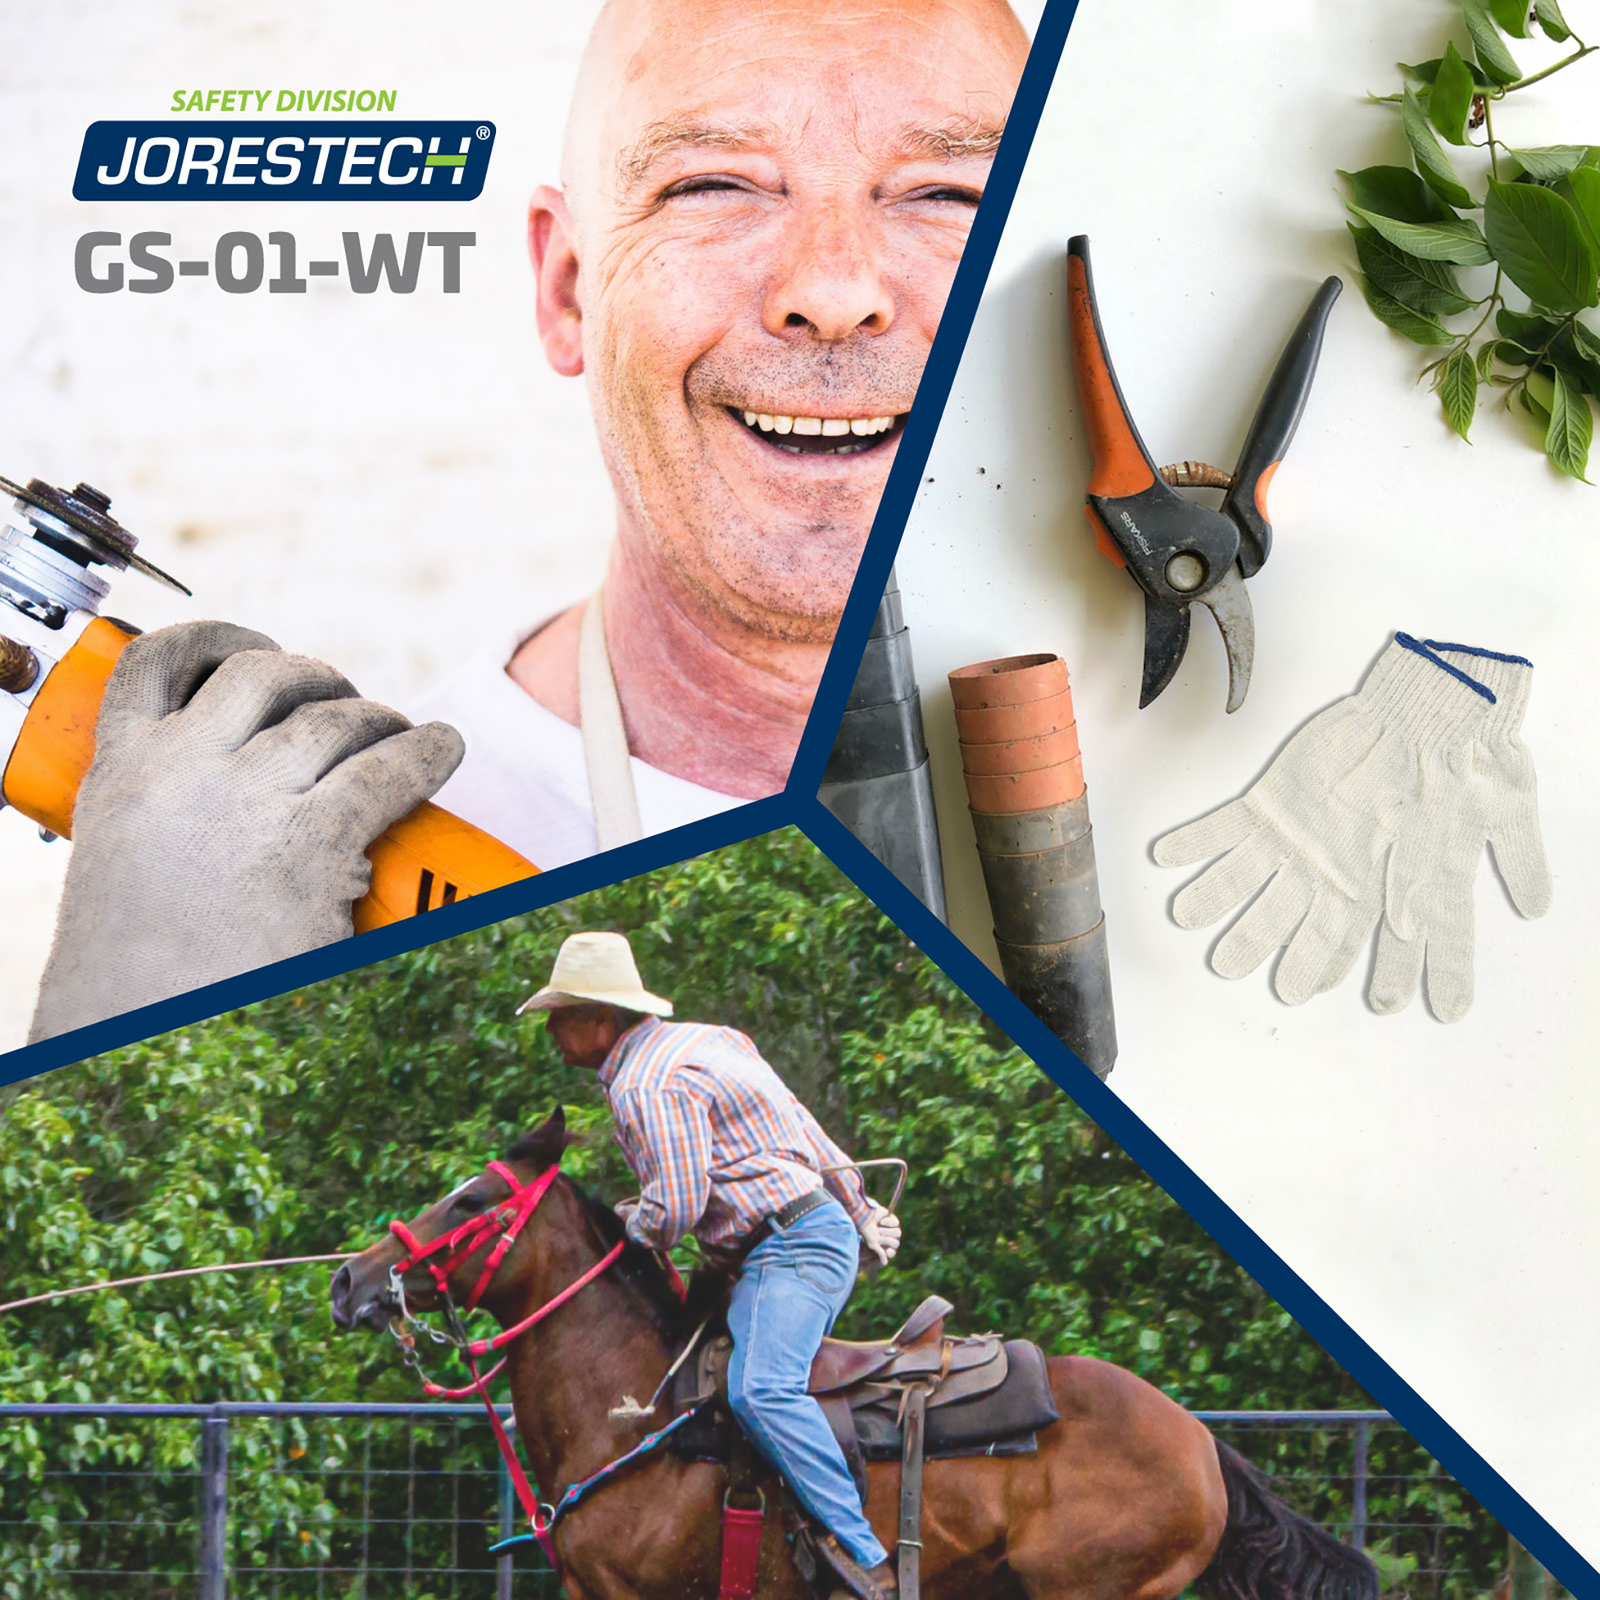 common uses for gloves: gardening,  horse back riding and when manipulating  tools and mechanics.